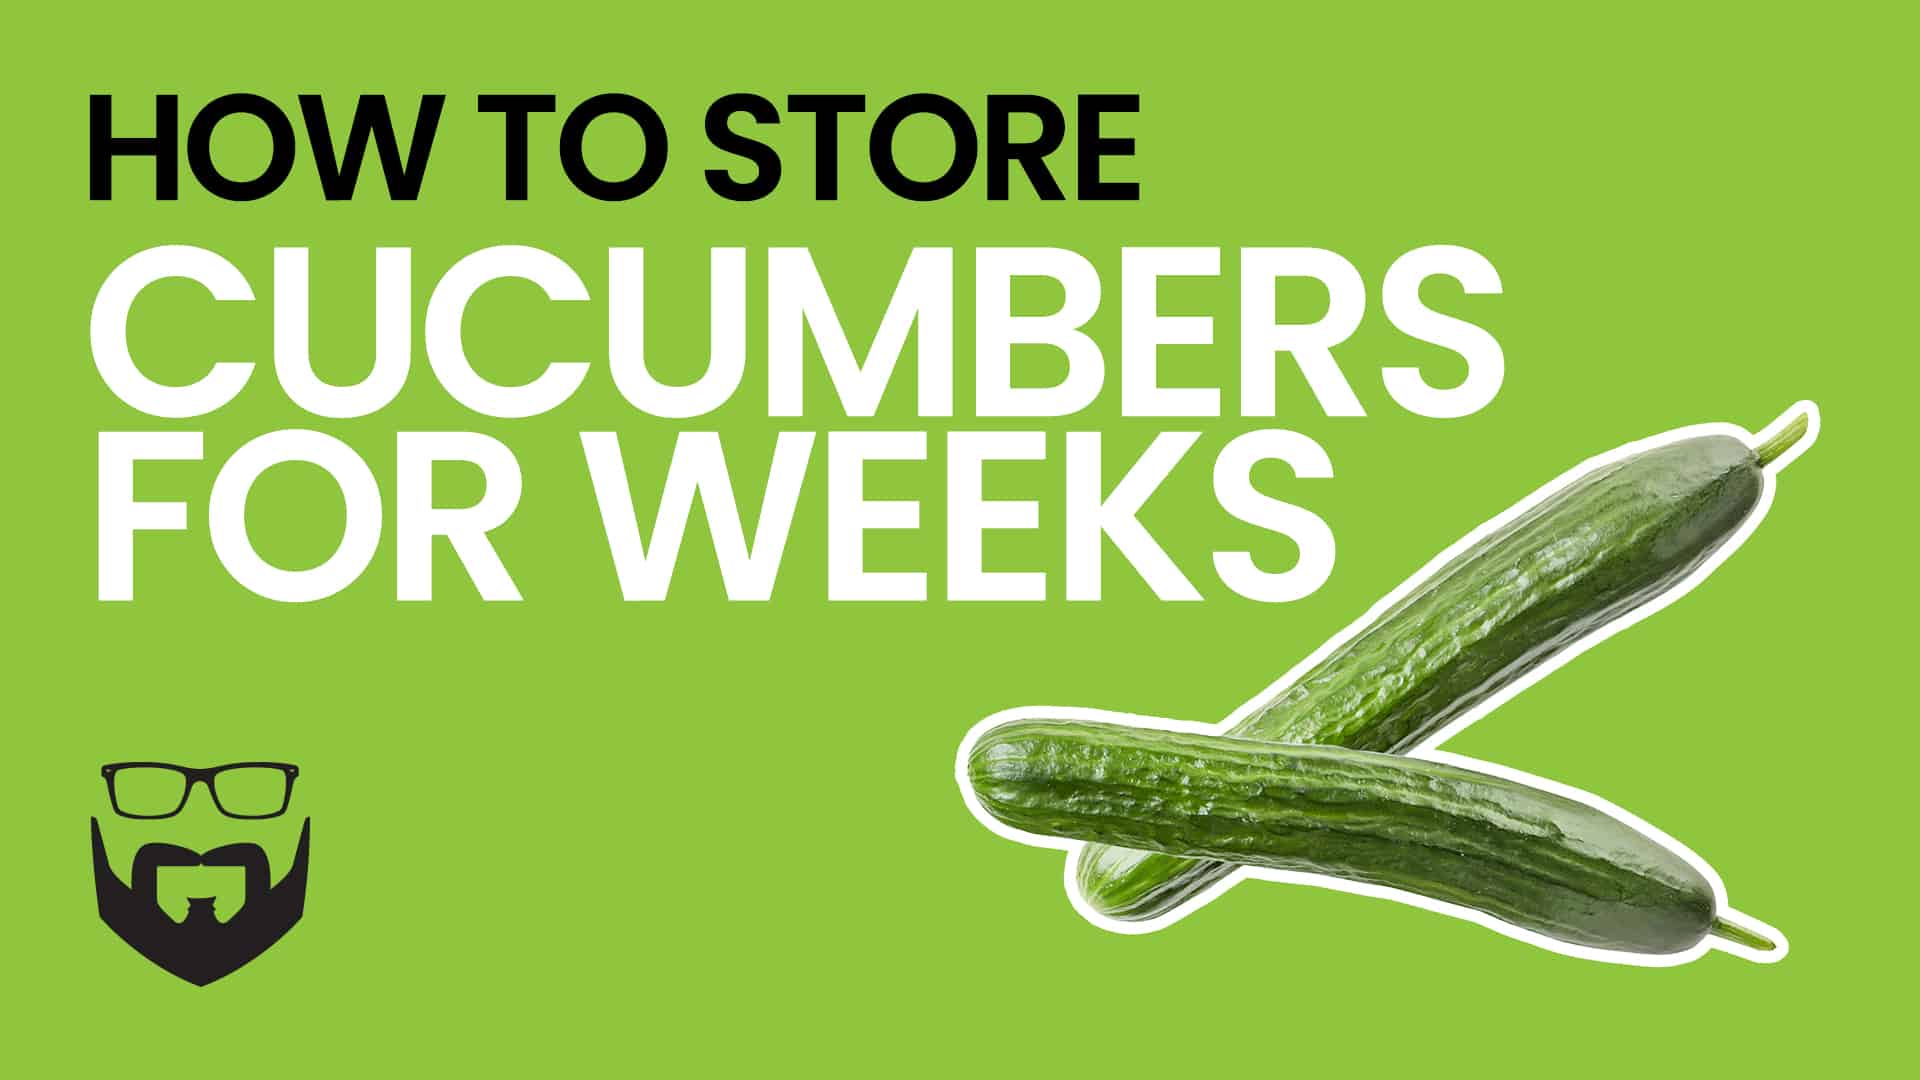 How to Store Cucumbers for Weeks Video - Green